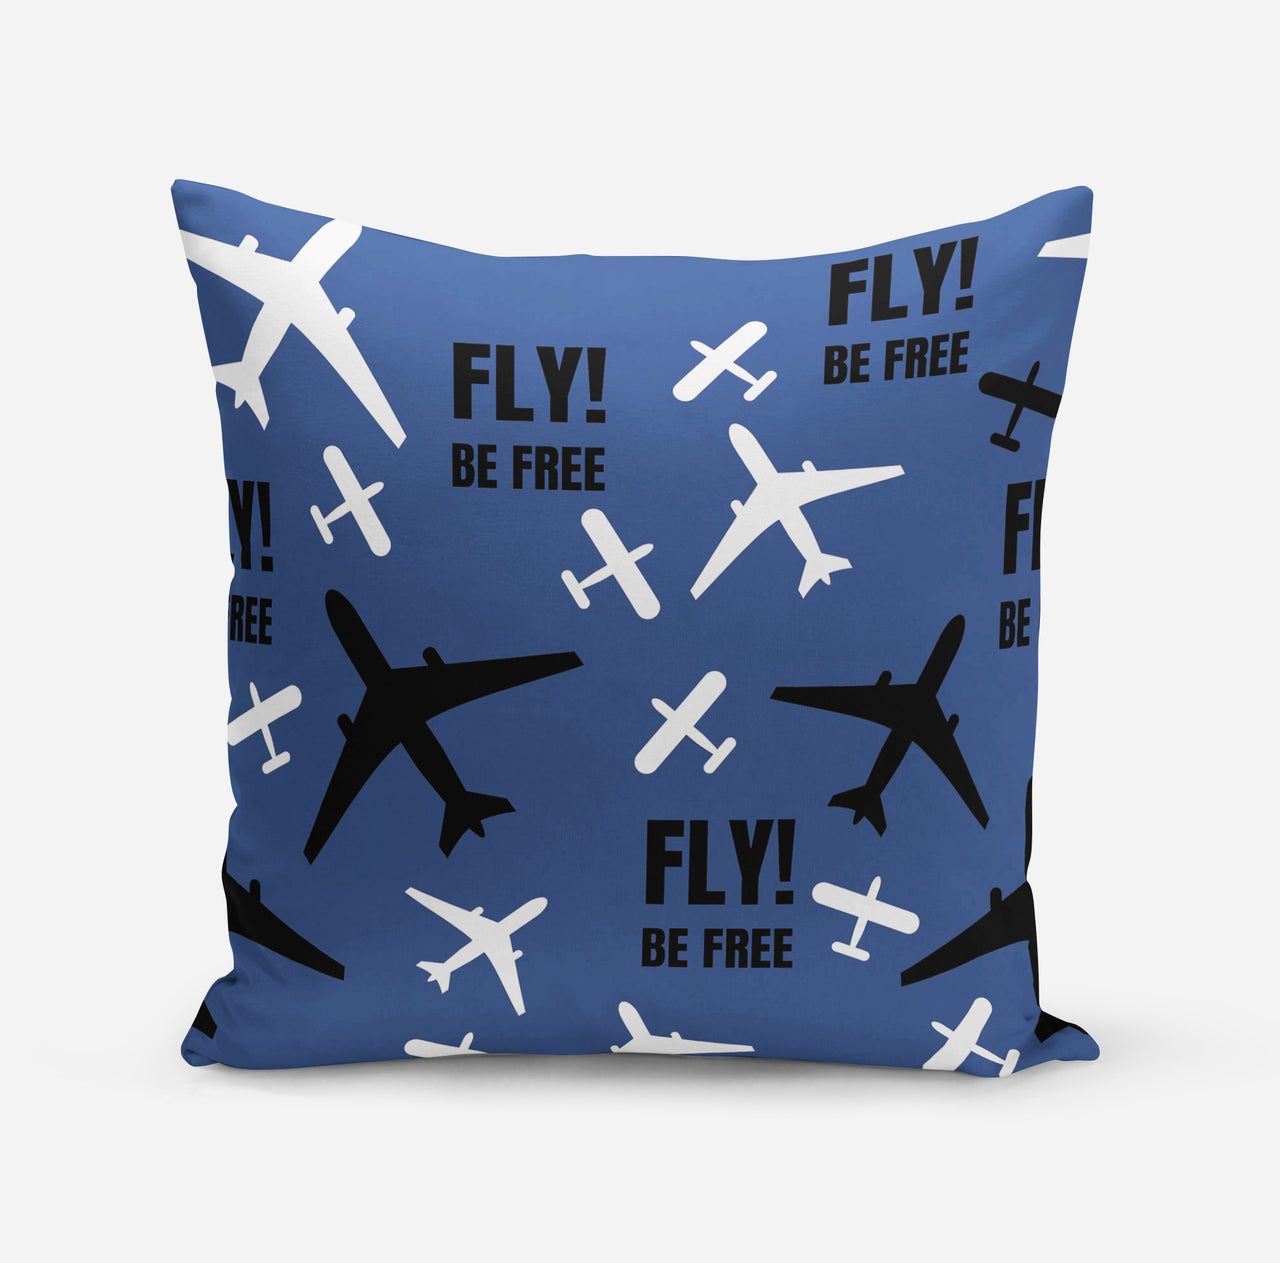 Fly Be Free Blue Designed Pillows